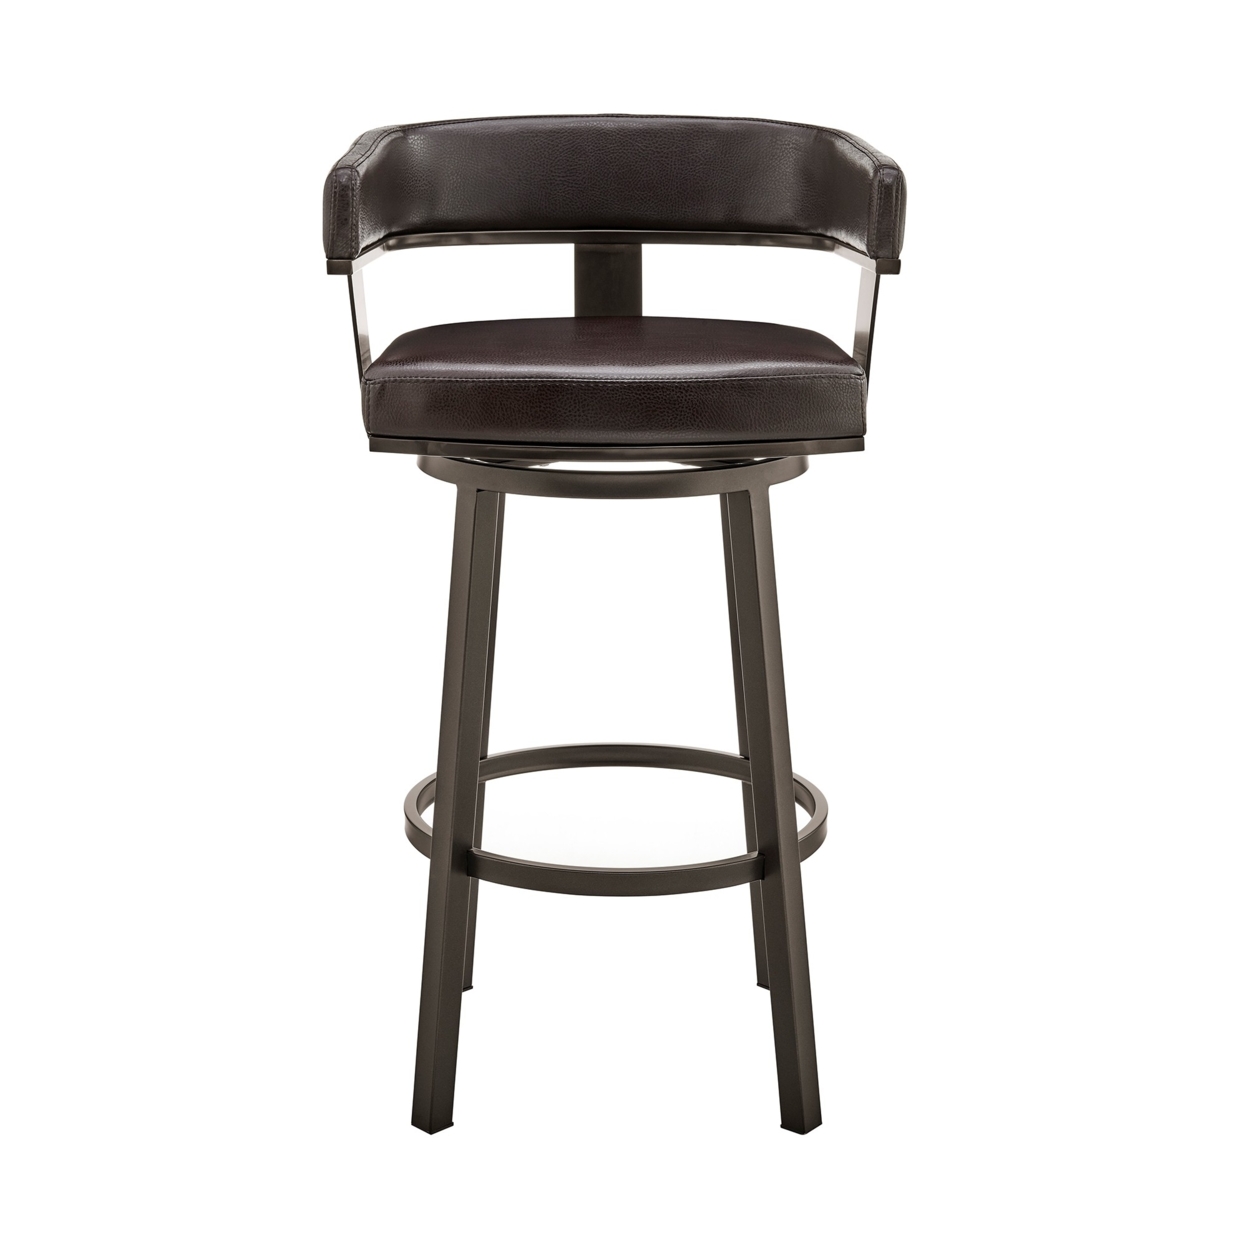 Jack 26 Inch Counter Height Bar Stool, Swivel Chair, Faux Leather, Brown- Saltoro Sherpi